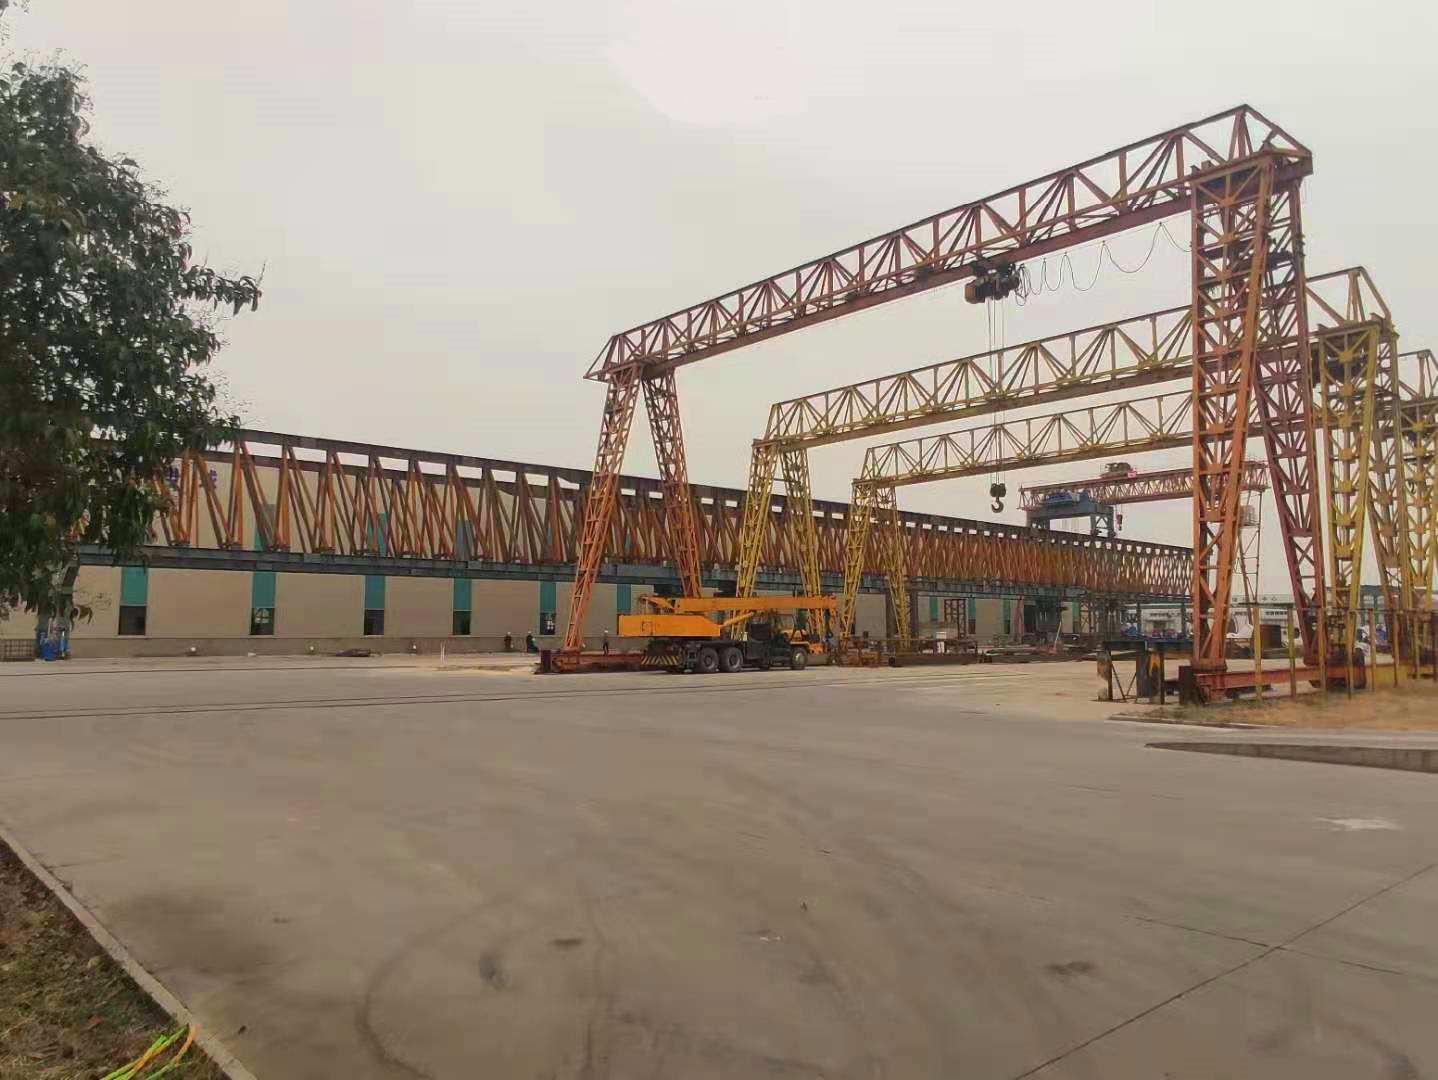 The ultra-large launching girder have been assembled sucessfully at Hansal Group